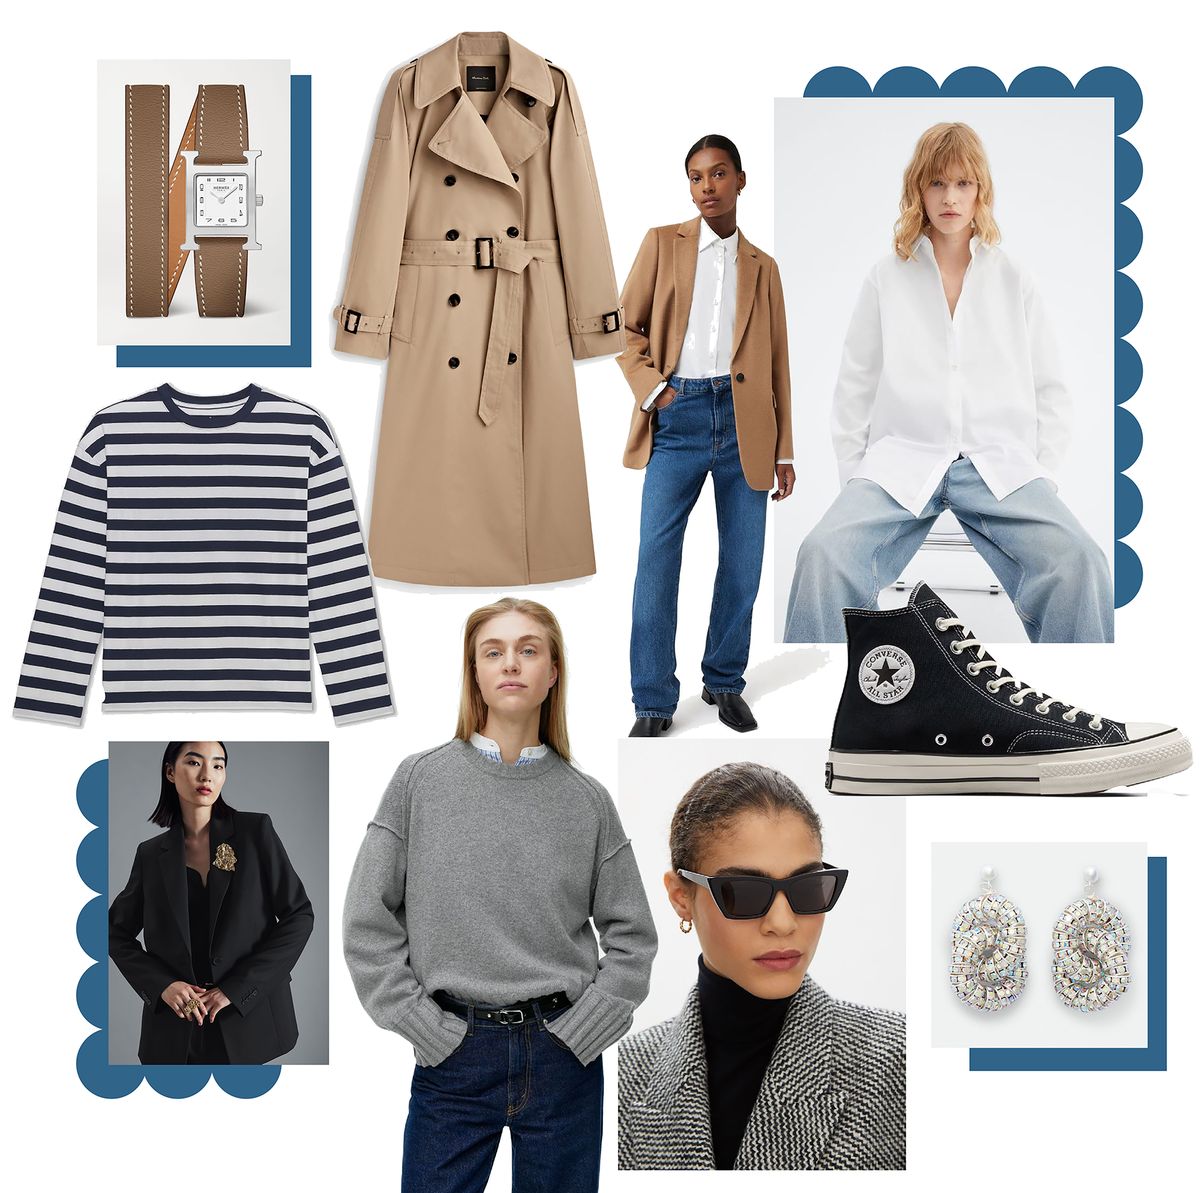 Best fashion buys: The 10 style heroes for your capsule wardrobe